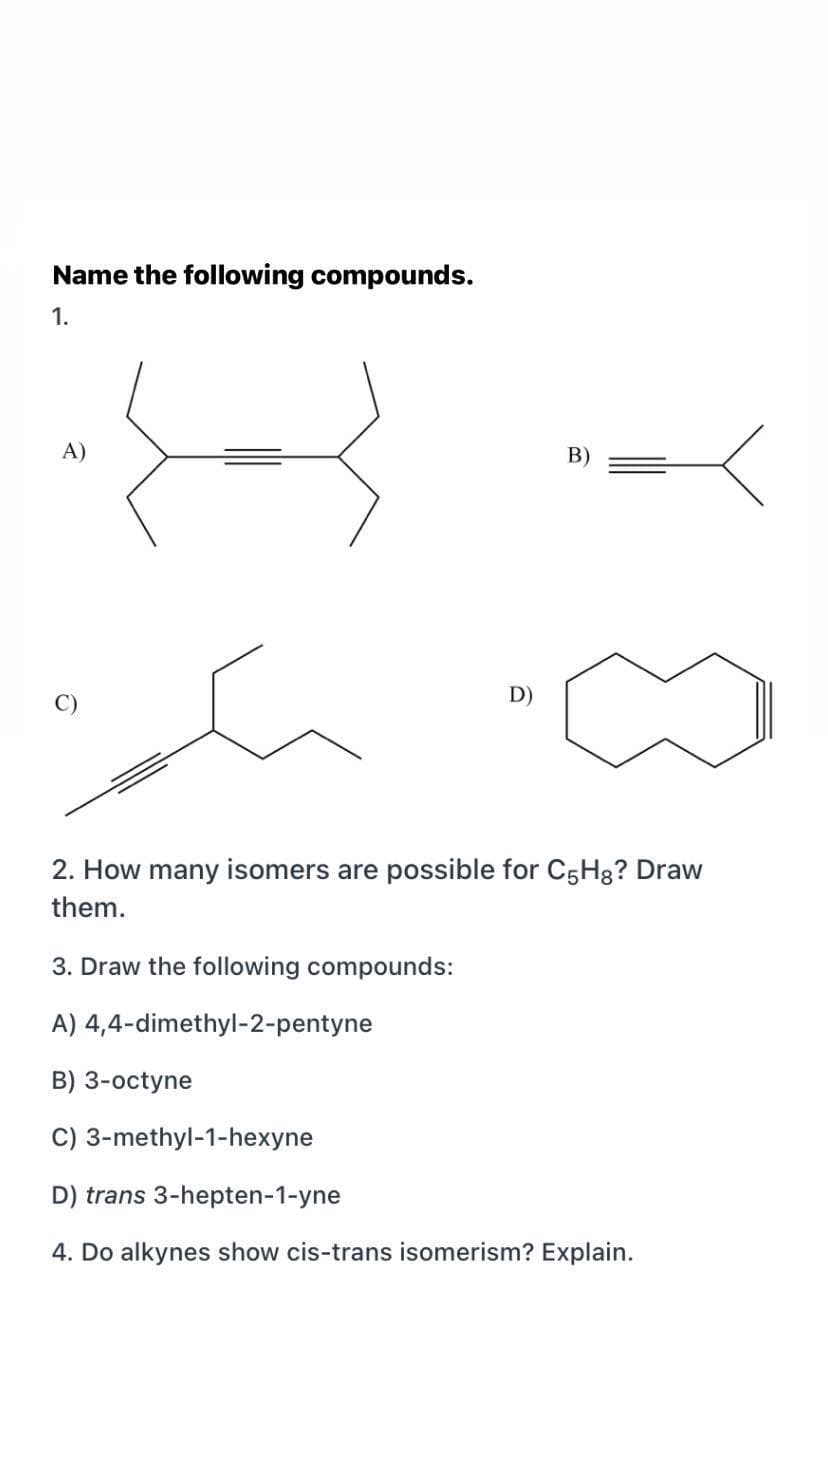 Name the following compounds.
1.
A)
C)
D)
2. How many isomers are possible for C5H8? Draw
them.
3. Draw the following compounds:
A) 4,4-dimethyl-2-pentyne
B) 3-octyne
C) 3-methyl-1-hexyne
D) trans 3-hepten-1-yne
4. Do alkynes show cis-trans isomerism? Explain.
B)
